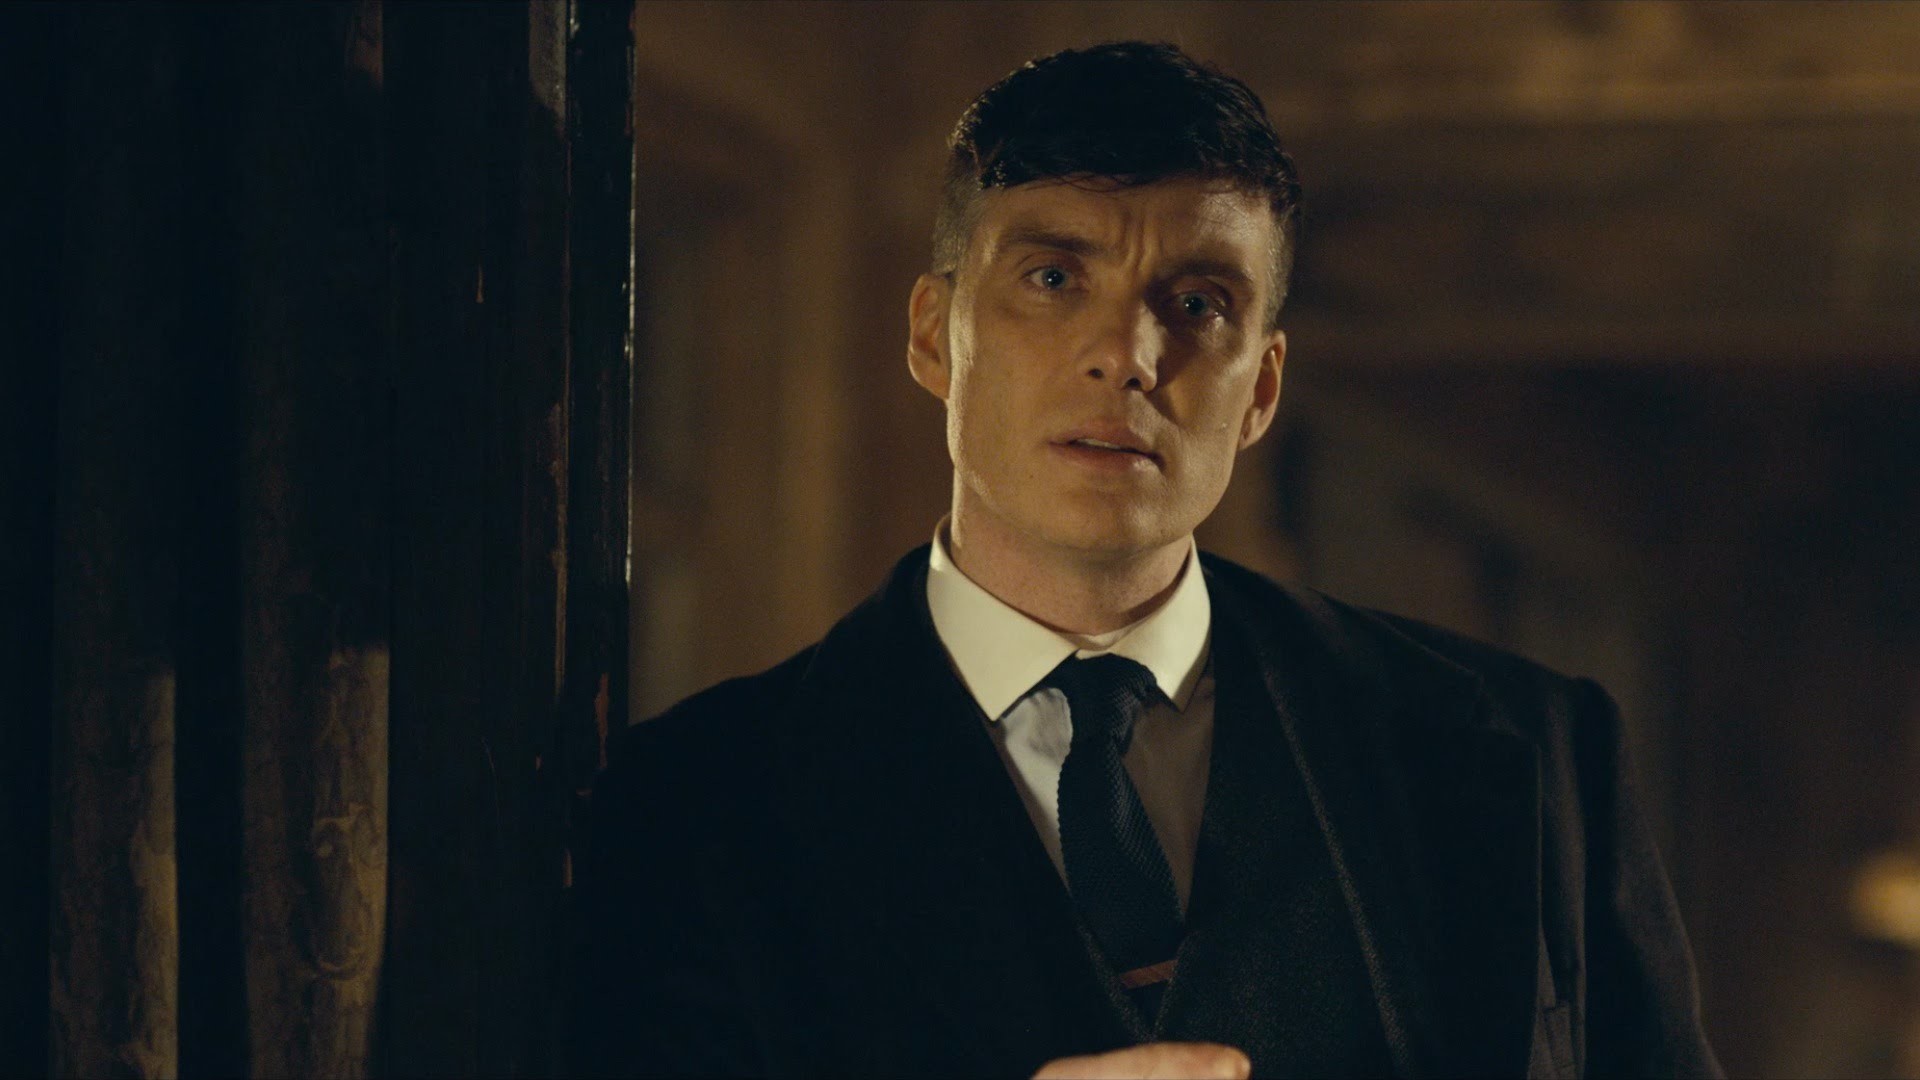 1920x1080 Shelby Family meeting - Peaky Blinders: Series 3 Episode 2 Preview - BBC  Two - YouTube